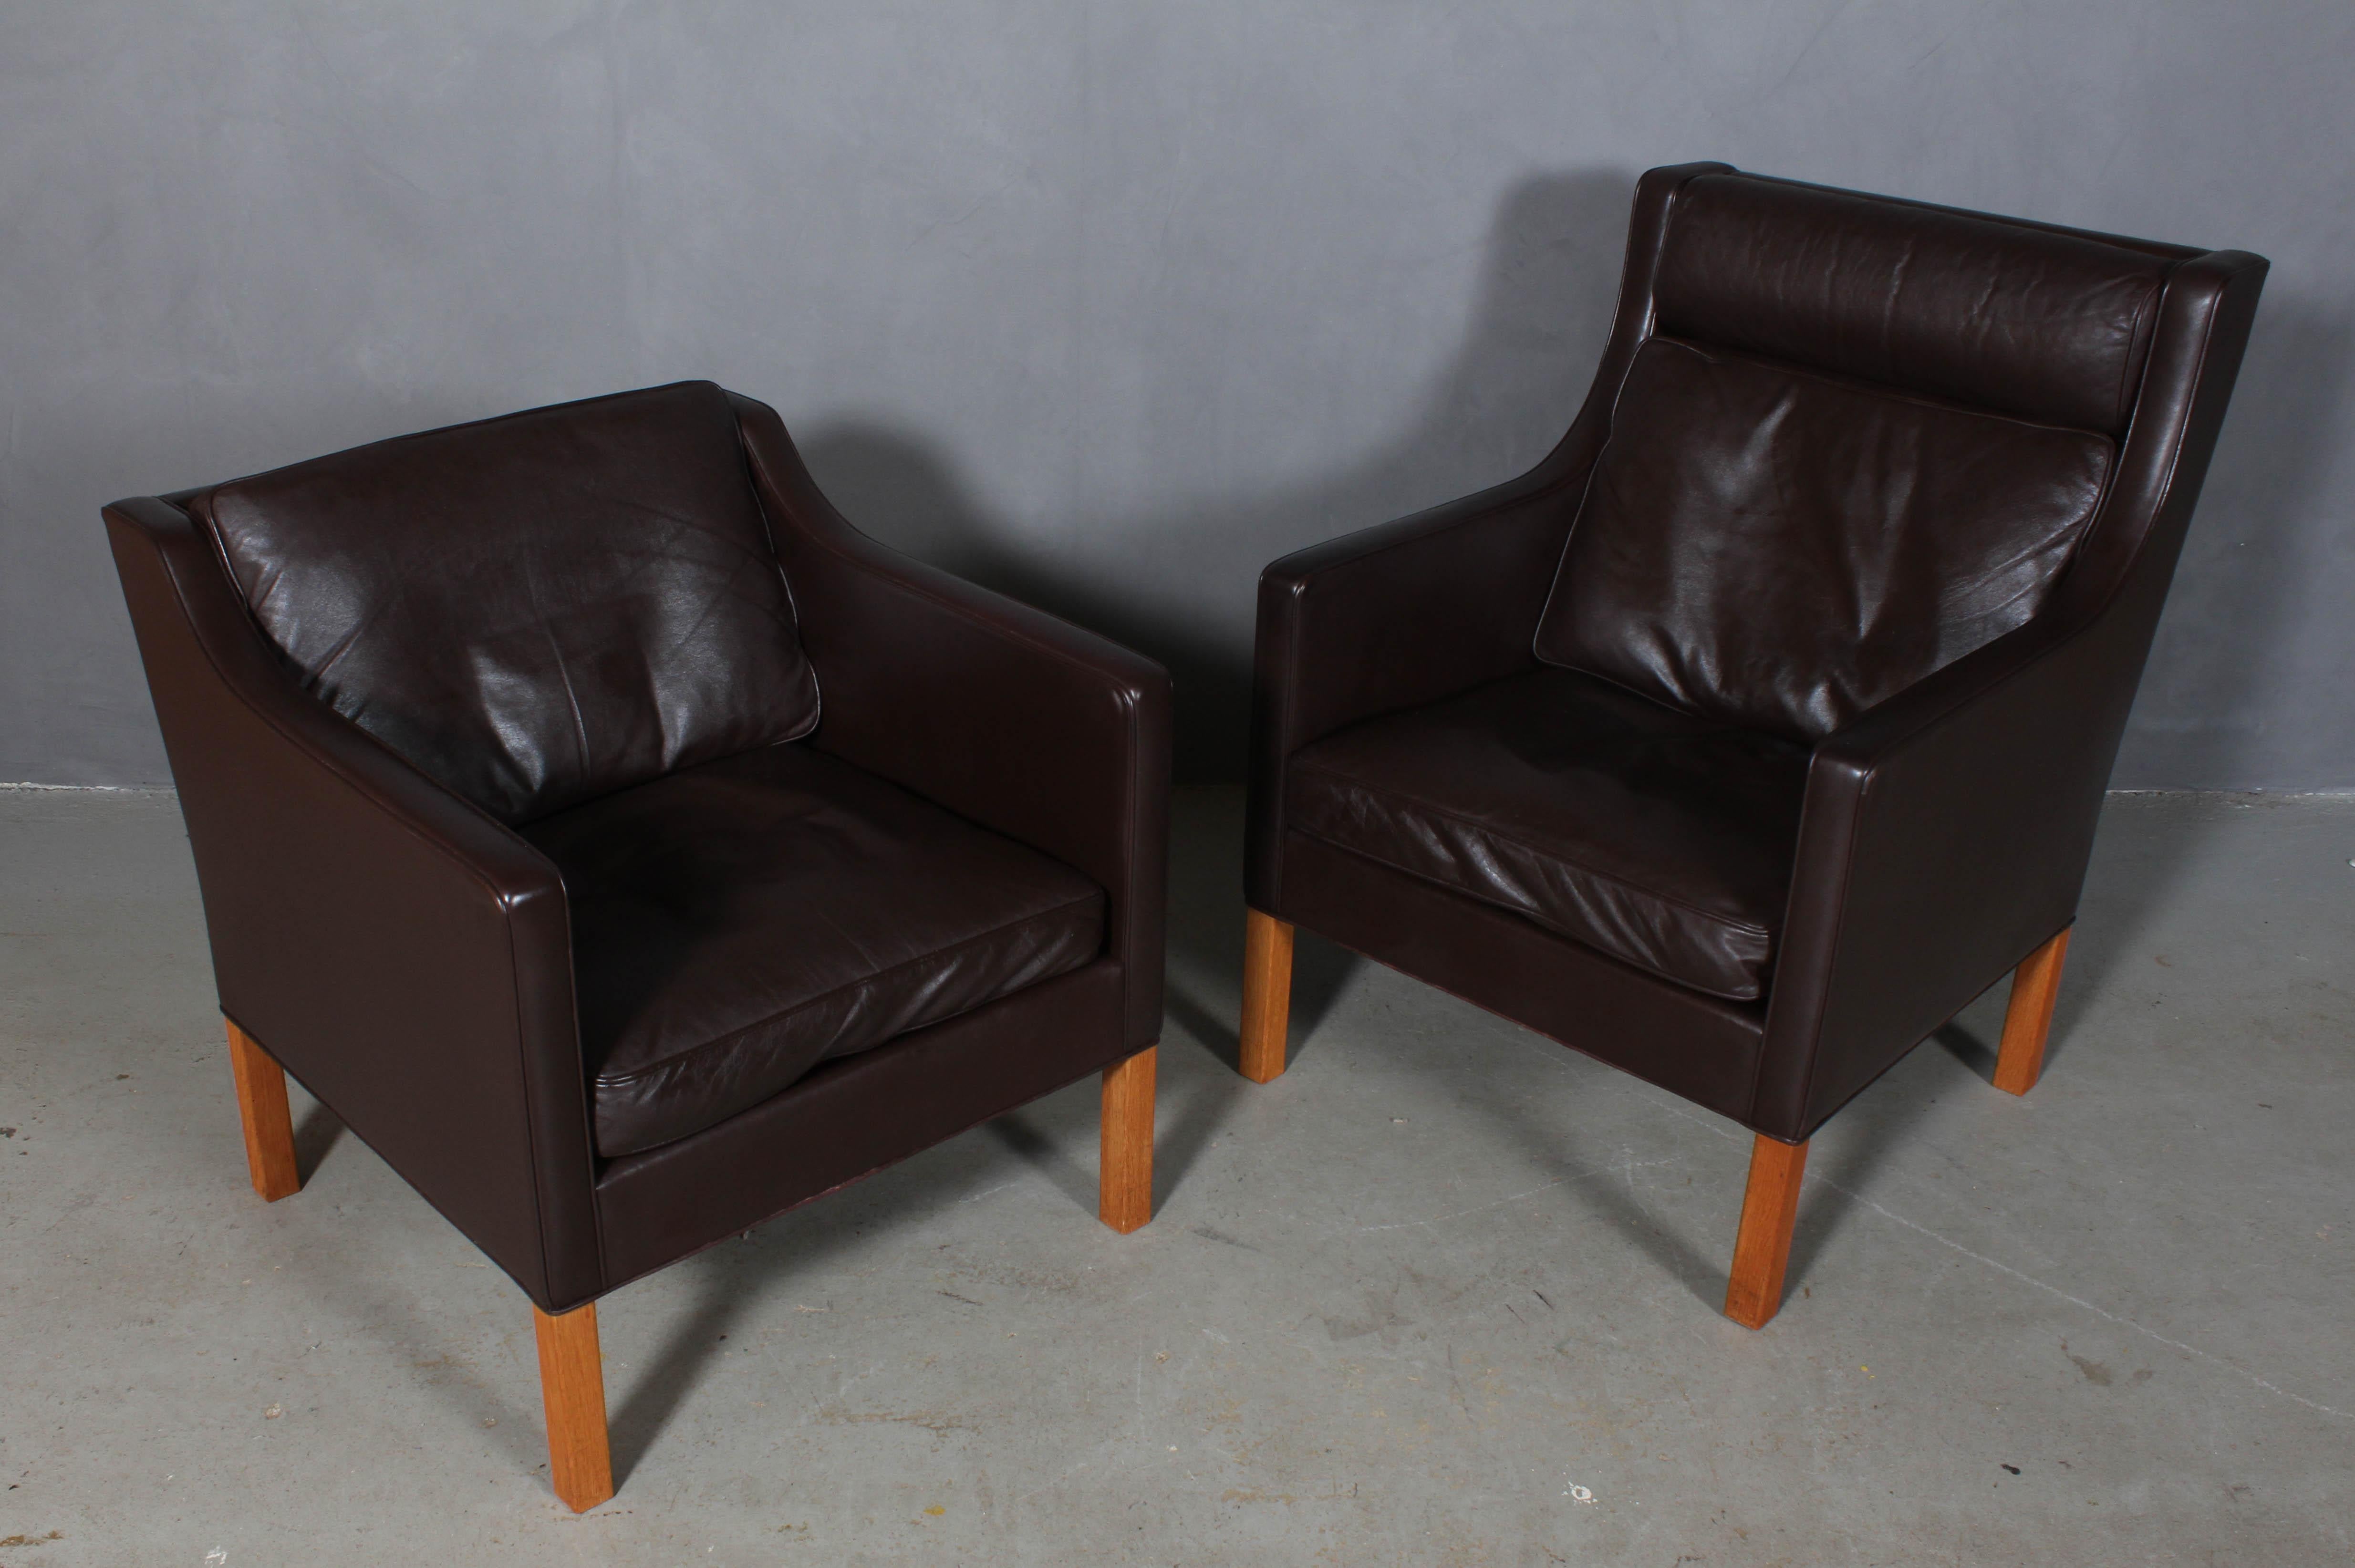 Børge & Peter Mogensen set of lounge chairs in original brown leather upholstery. 

Legs in oak.

Model 2431 and 2421, made by Fredericia furniture.

This is a cooperation between Børge Mogensen and his son Peter Mogensen.